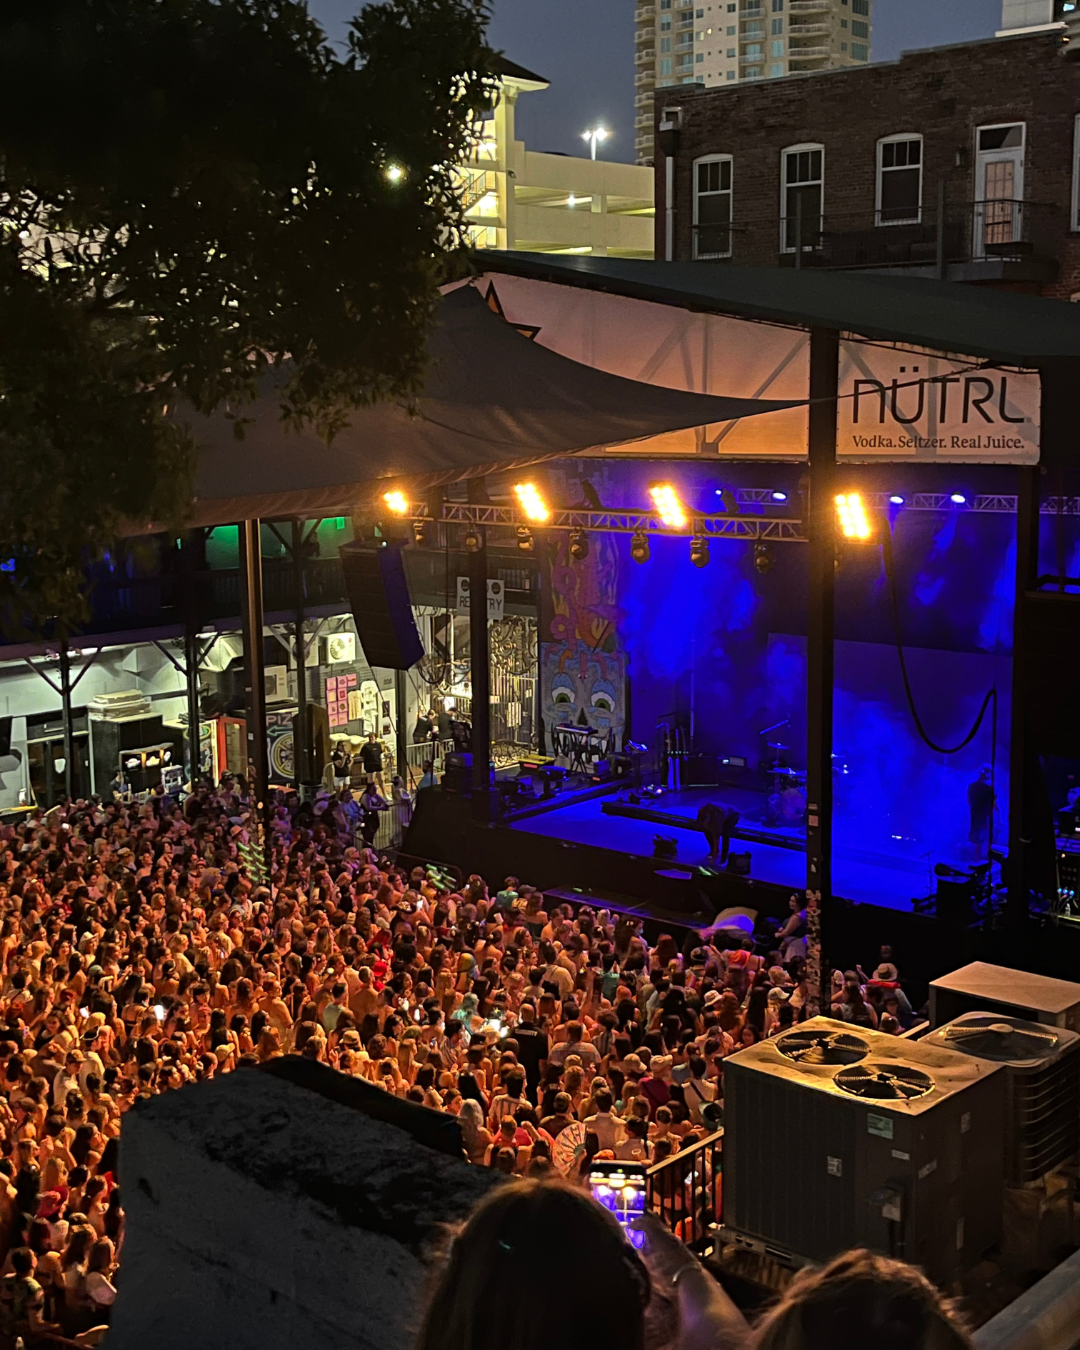 The view of a Chappell Roan concert from above